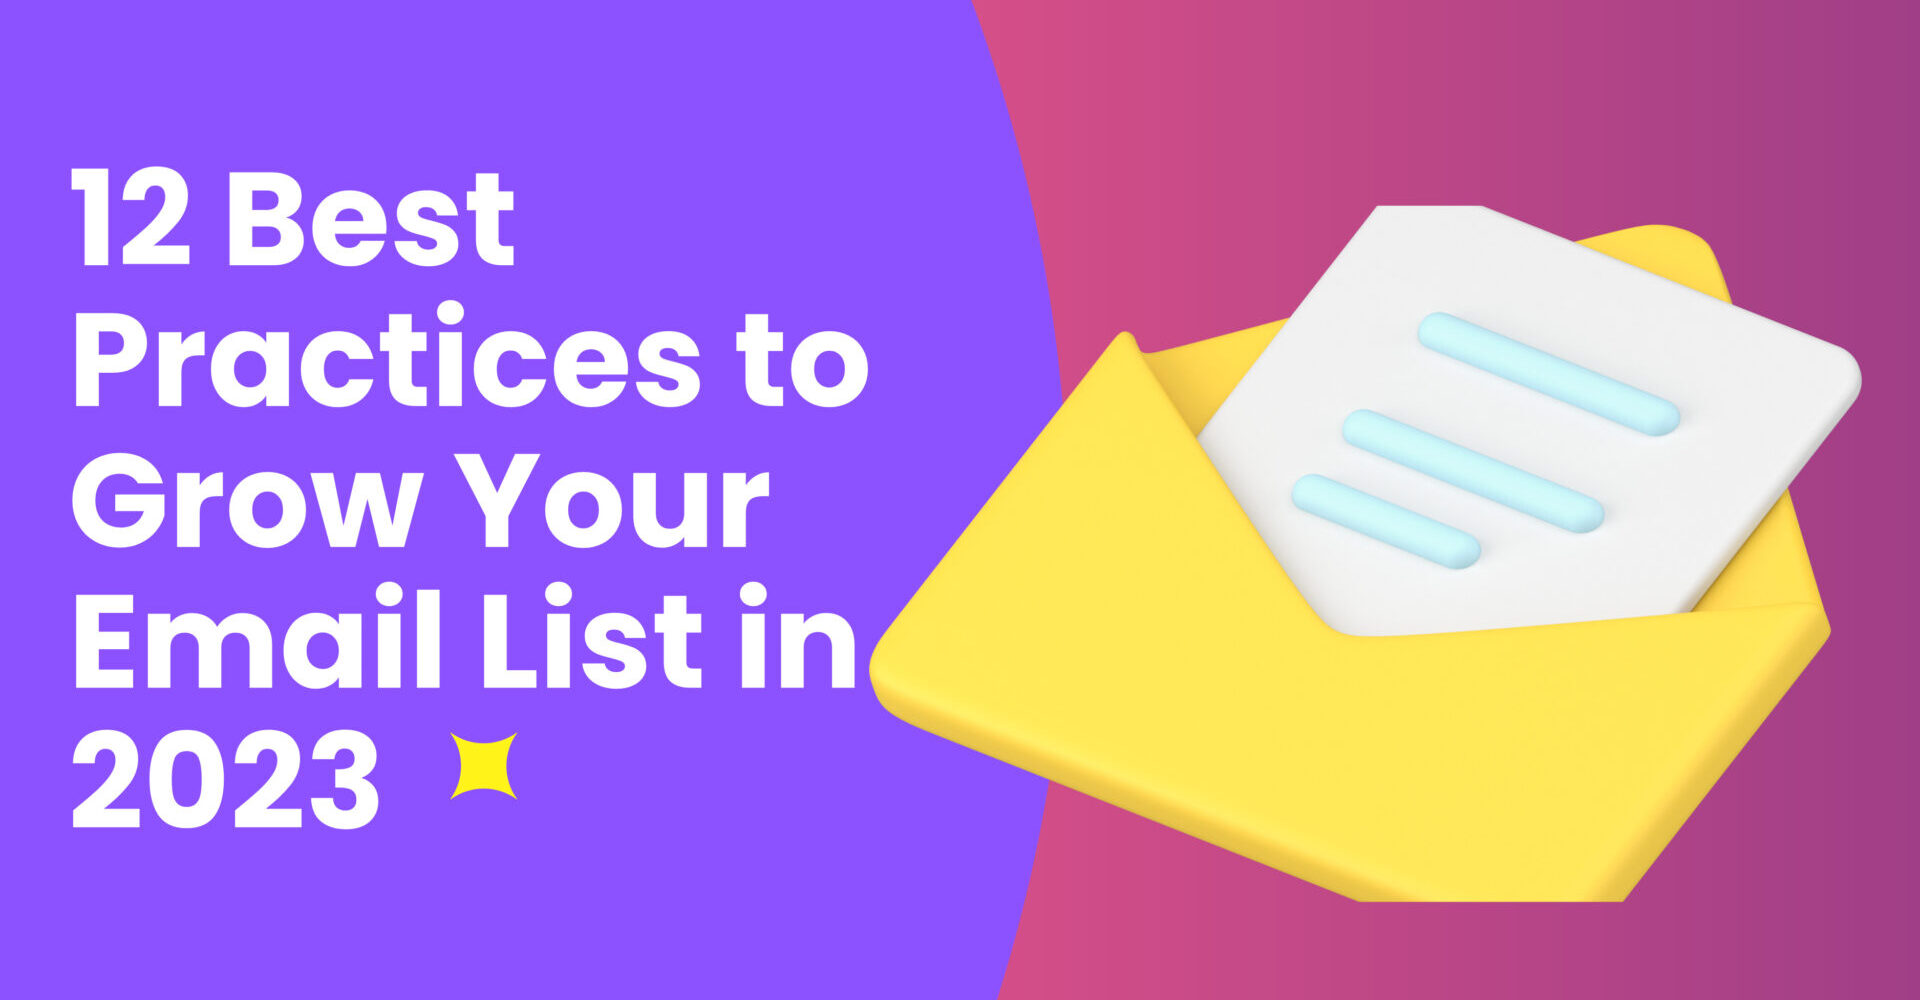 Best Practices to Grow Your Email List